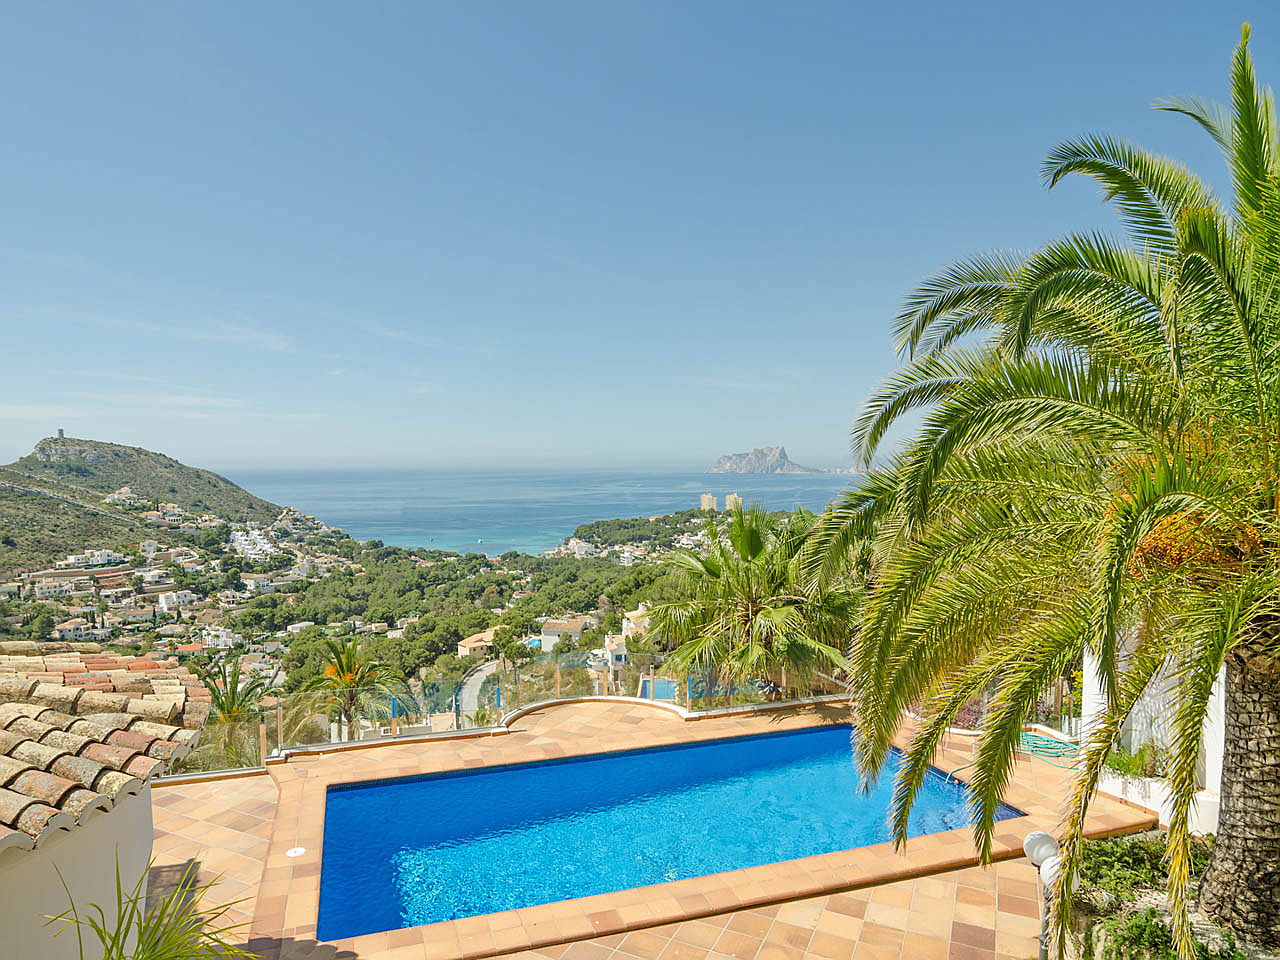  Calpe, Costa Blanca
- The house is built of very high quality materials, enjoys an absolutely wonderful and enviable location with spectacular sea views and designed in an elegant and timeless style in perfect harmony with the area and its location.